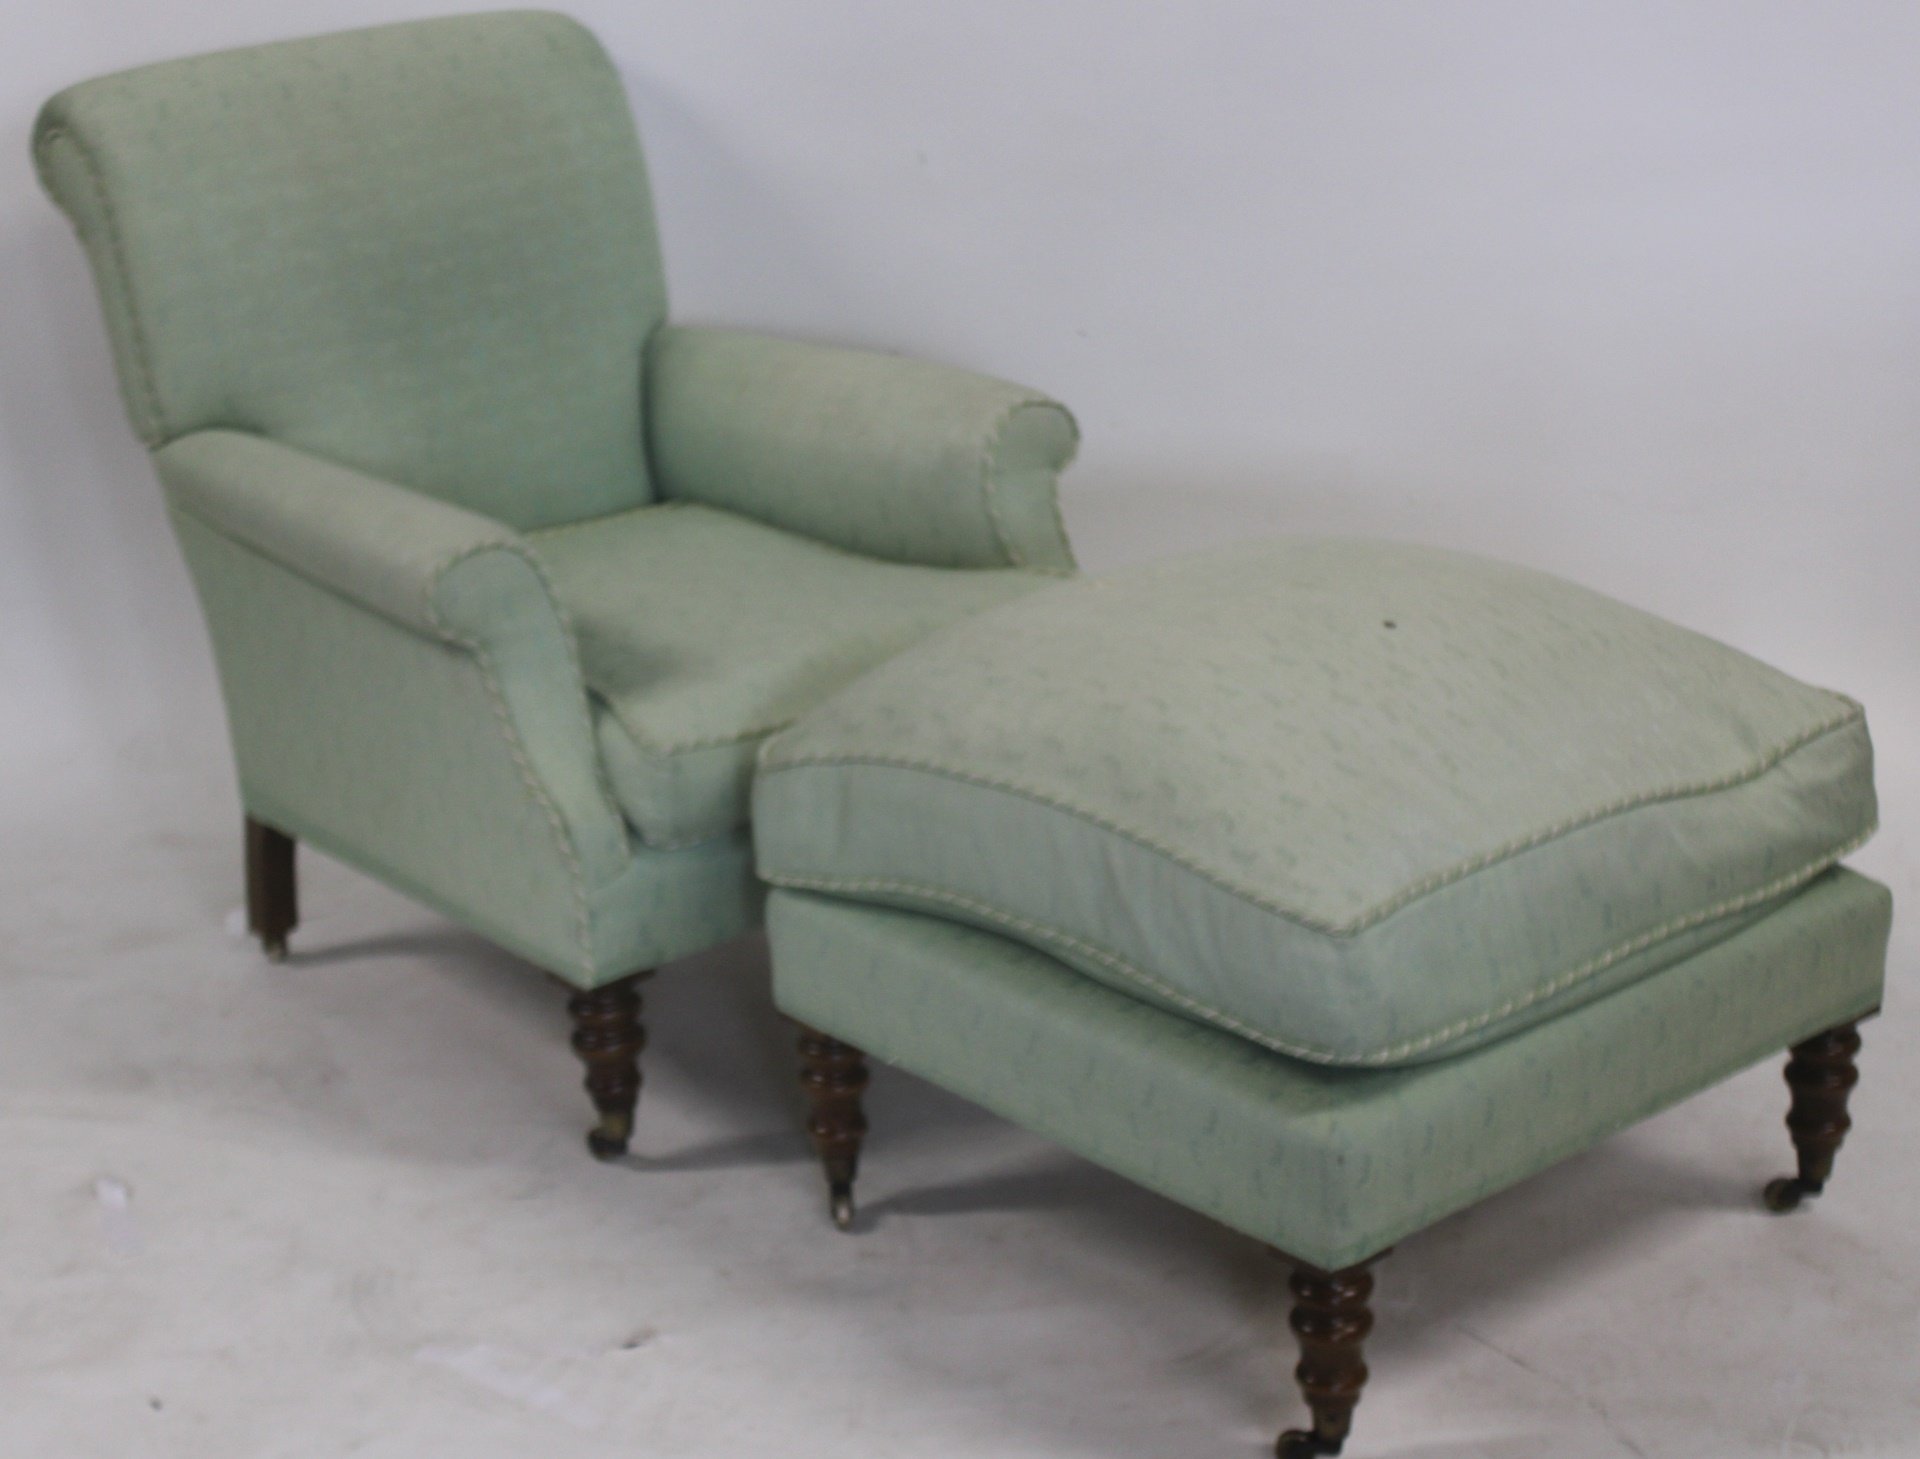 VINTAGE GEORGE SMITH STYLE UPHOLSTERED